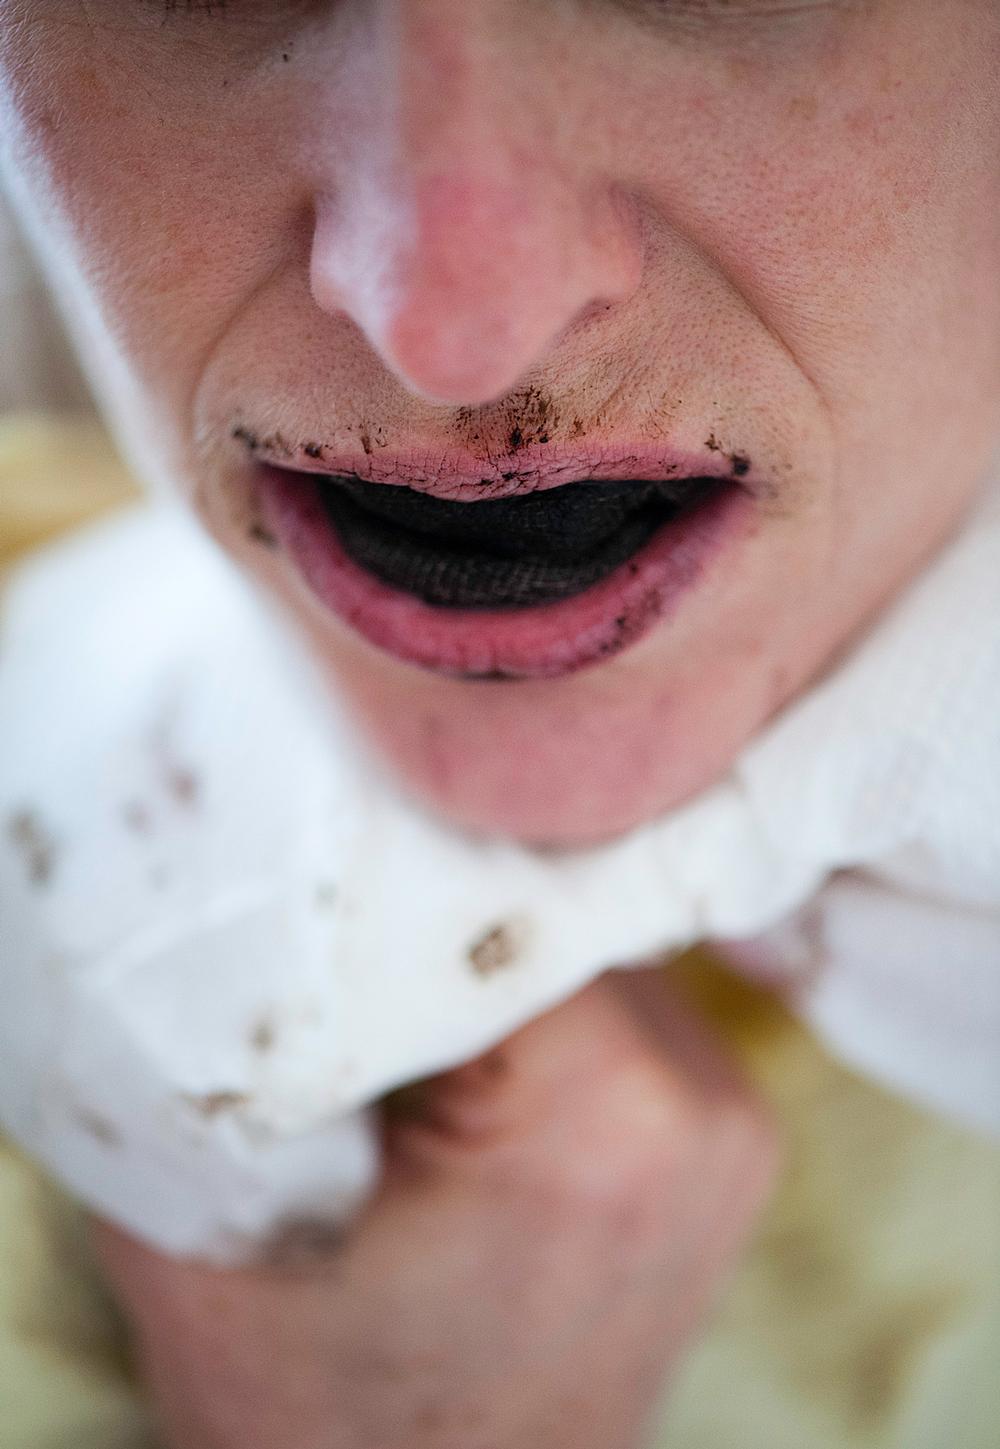 A mud gum treatment in Lithuania